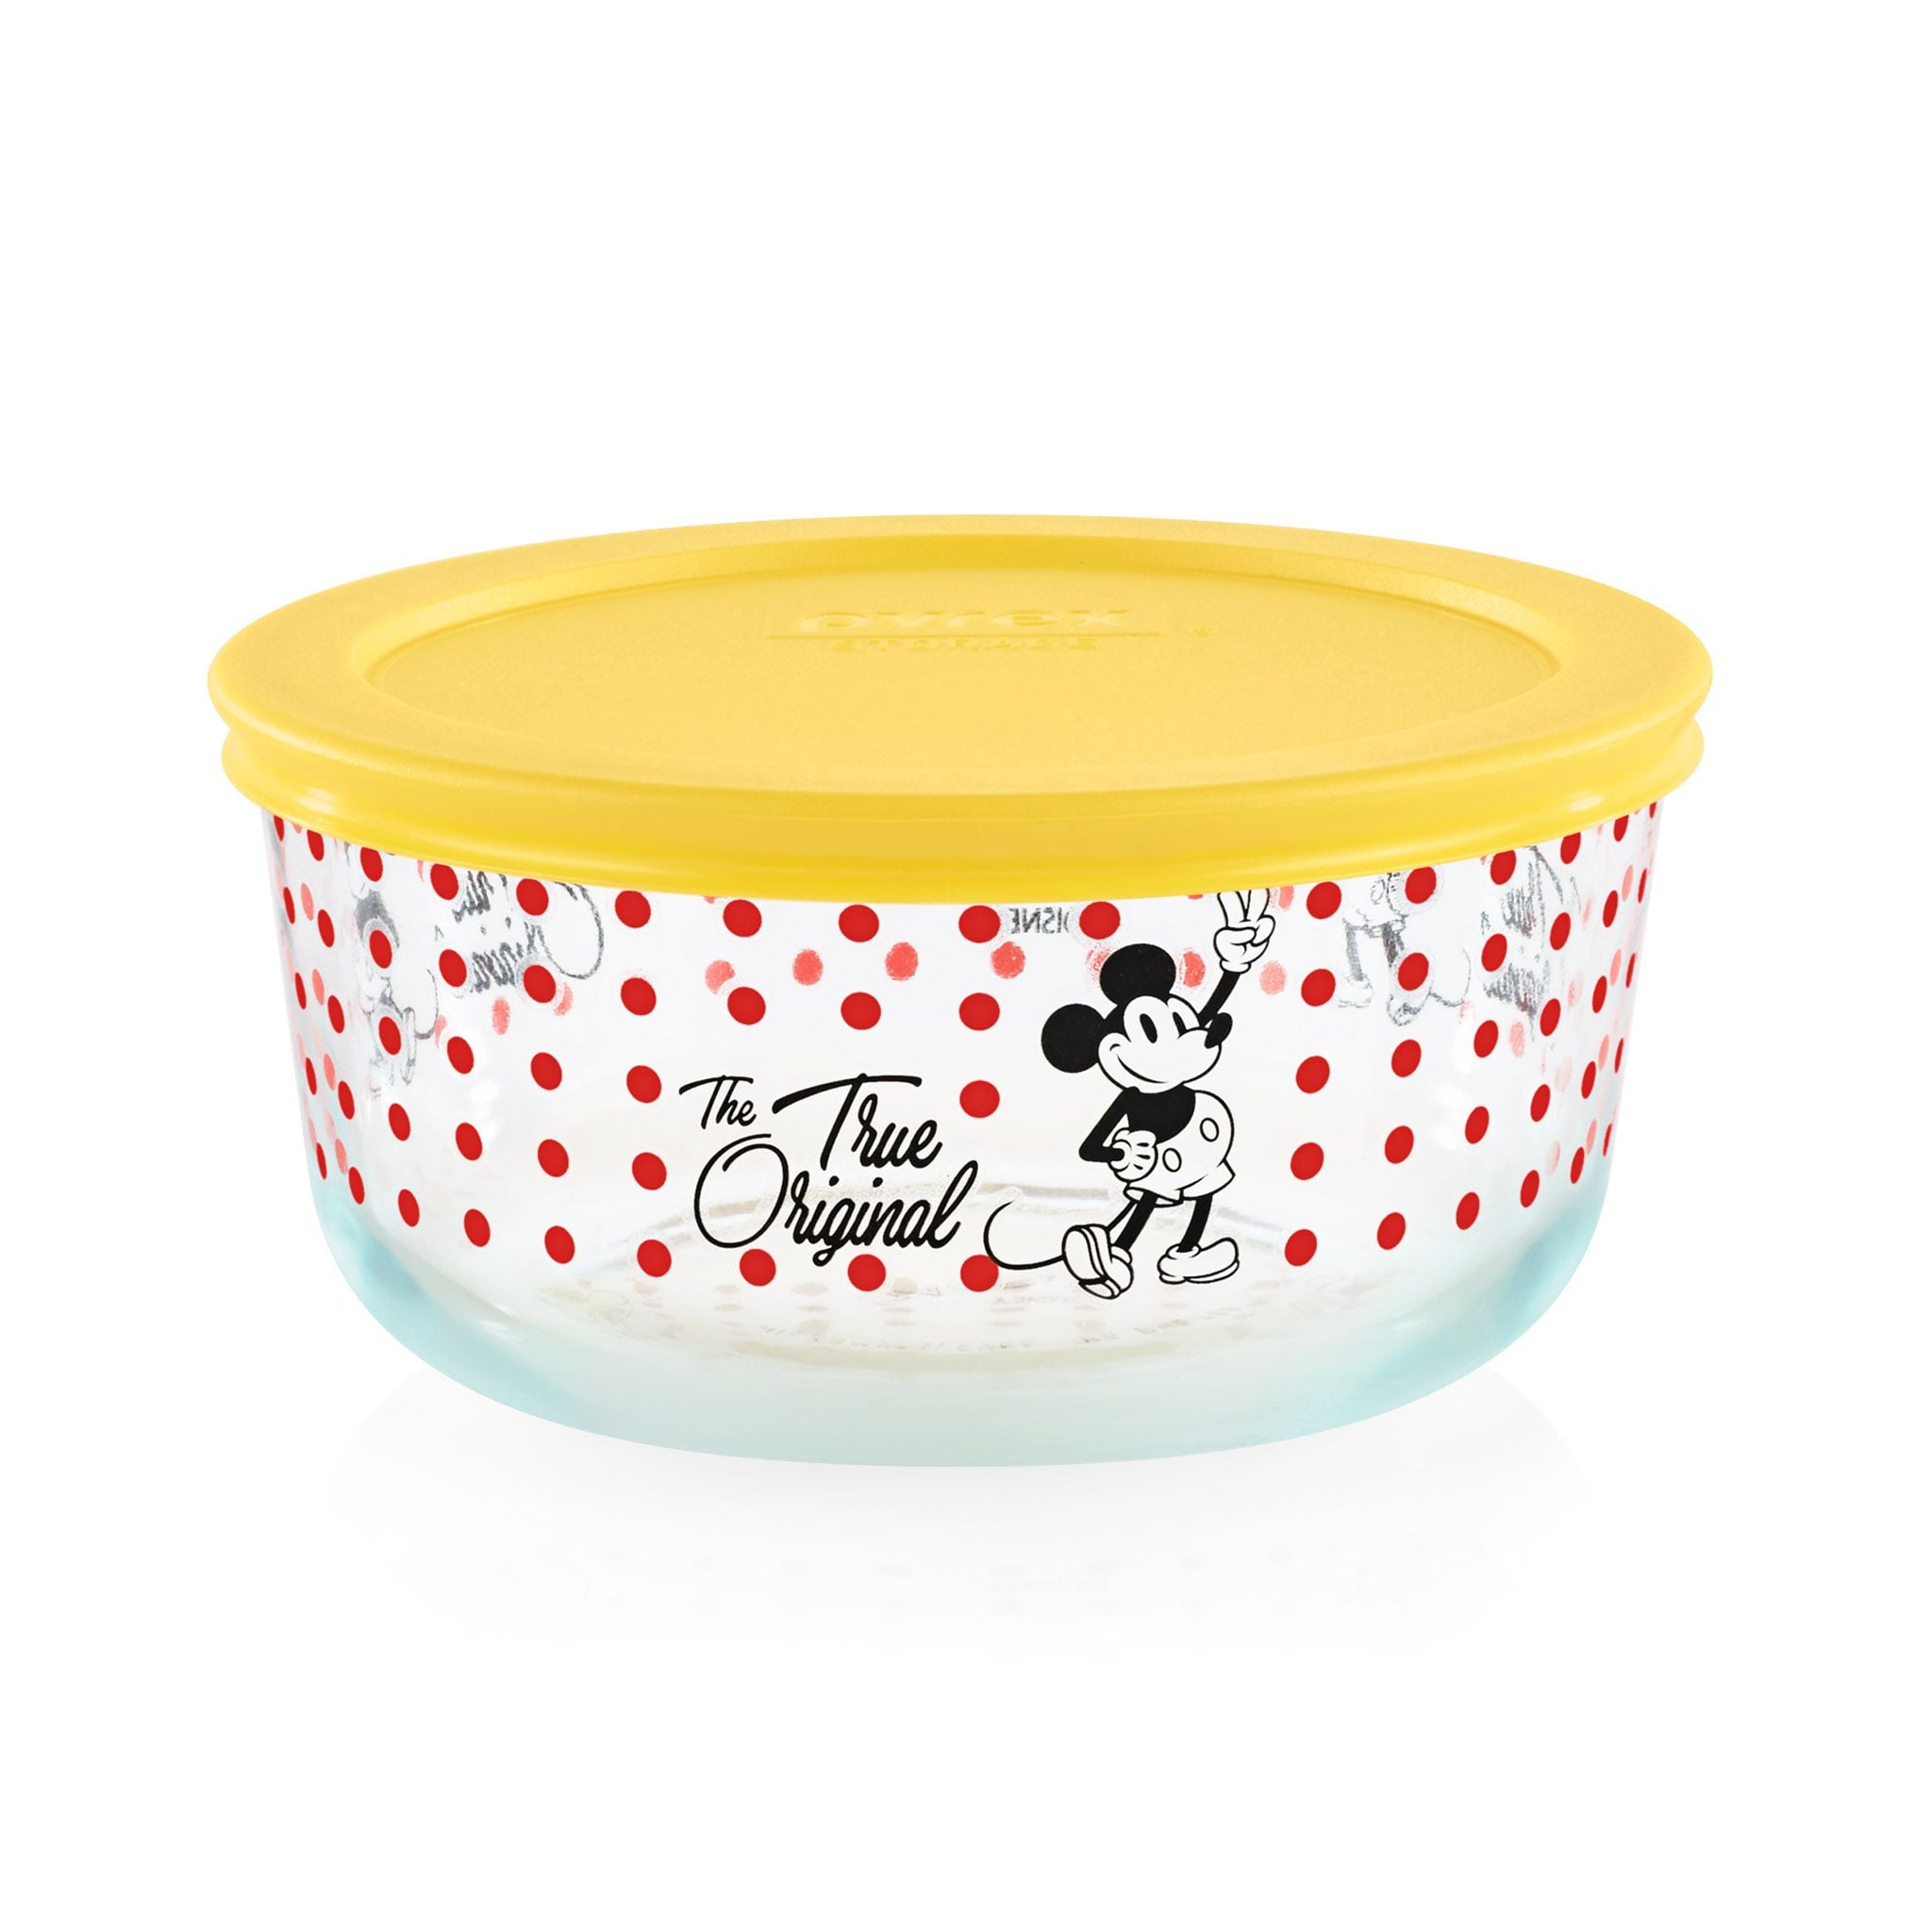 Pyrex Just Launched a Limited-Edition Mickey Mouse Collection